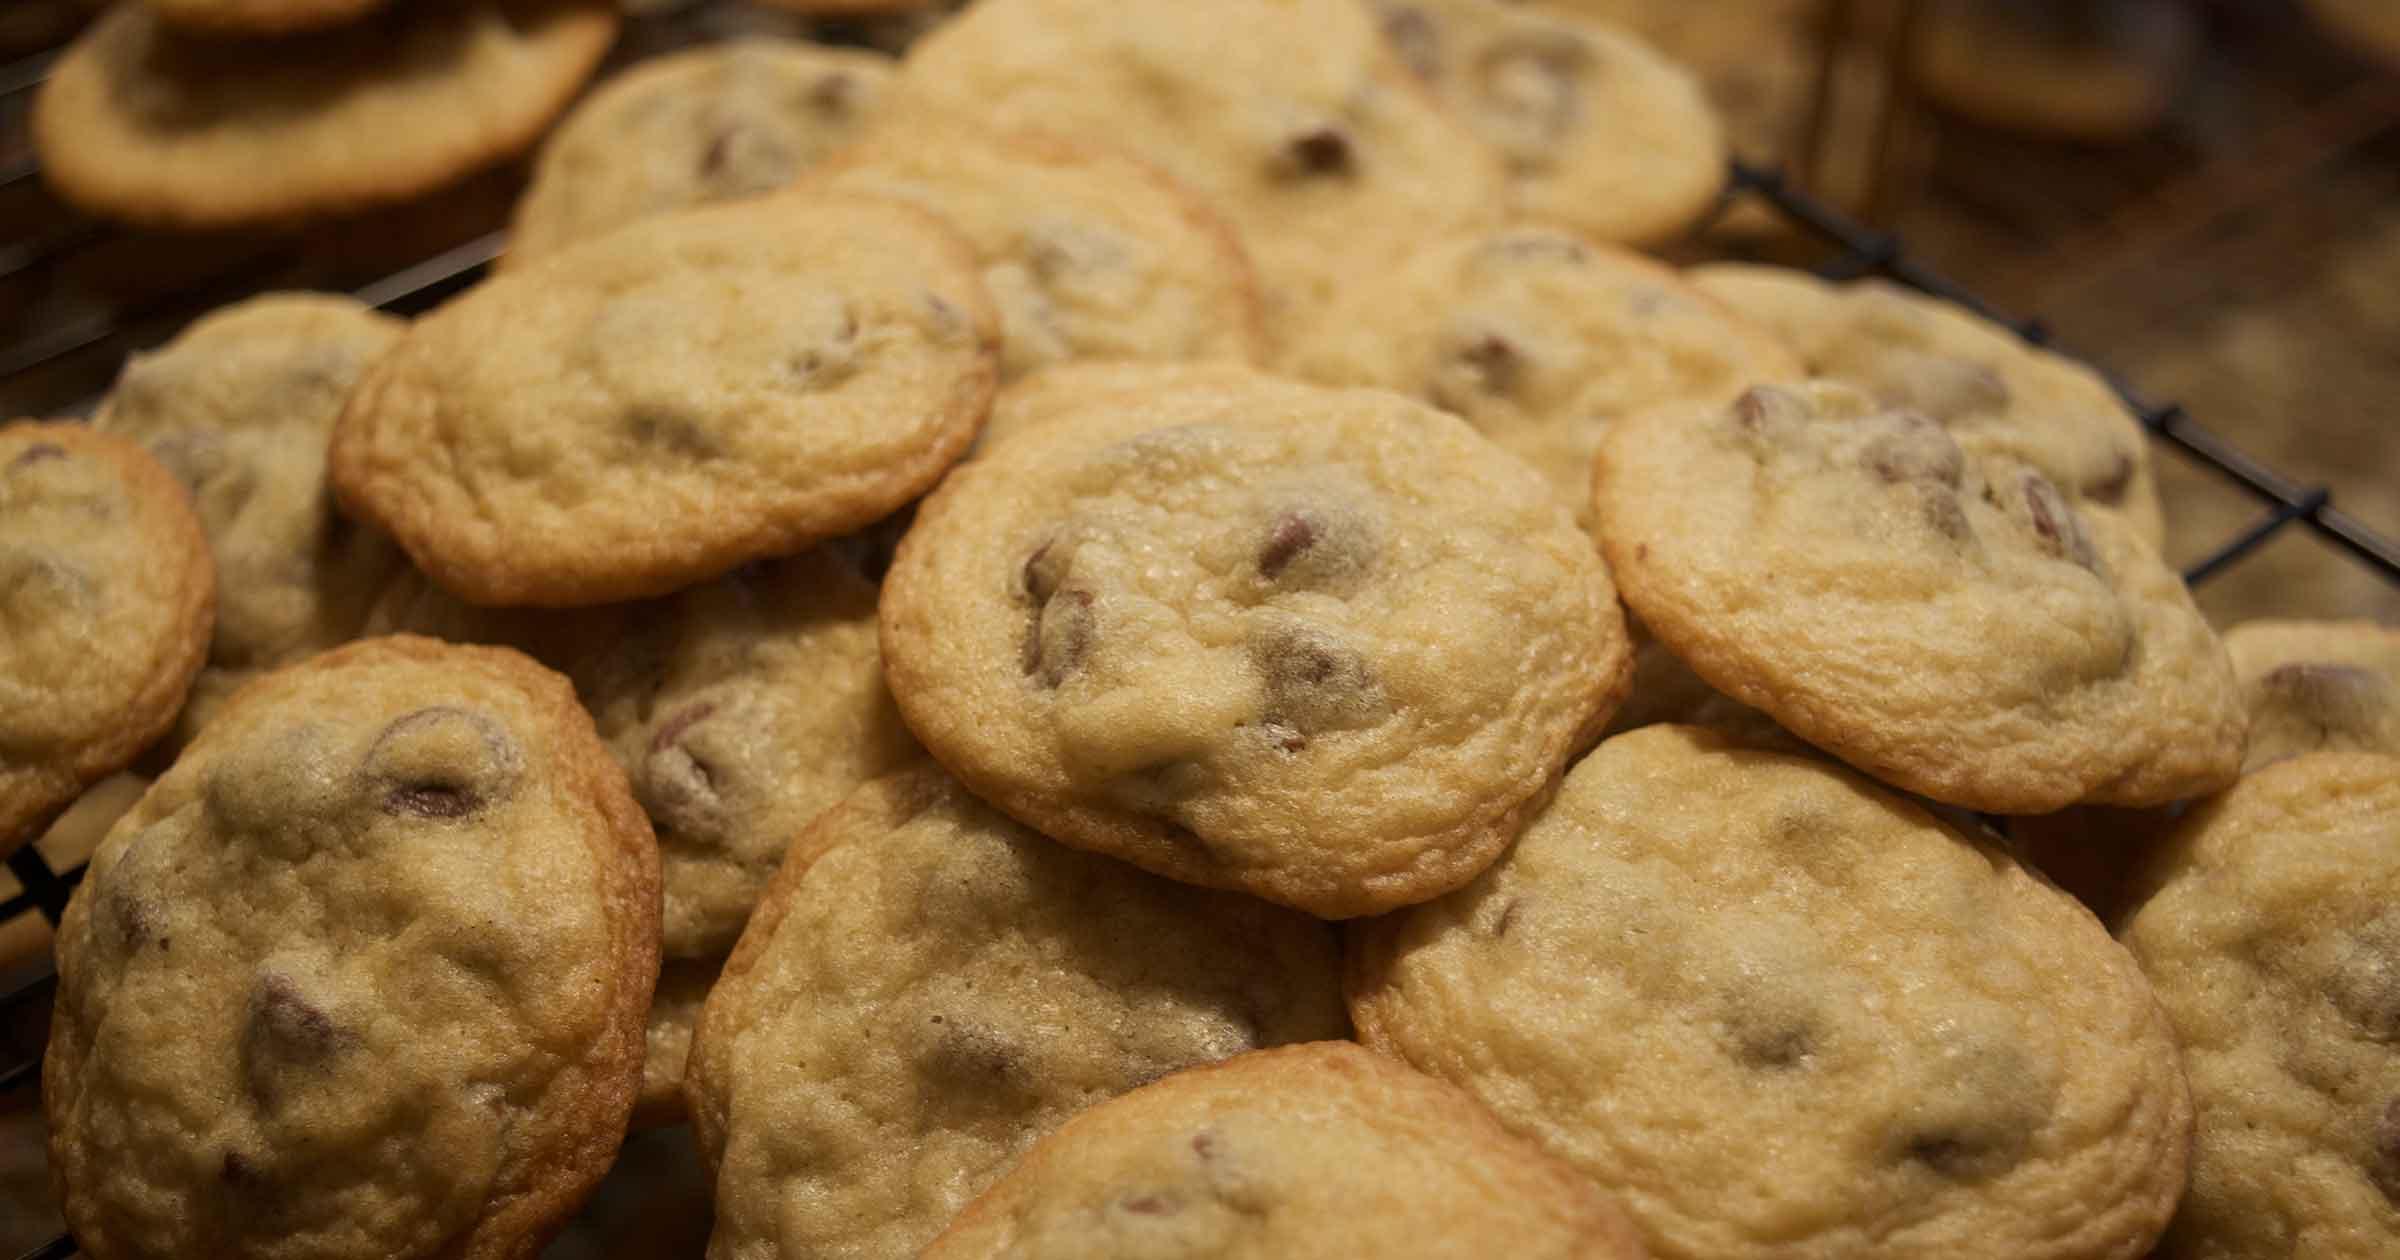 Piles of chocolate chip cookies